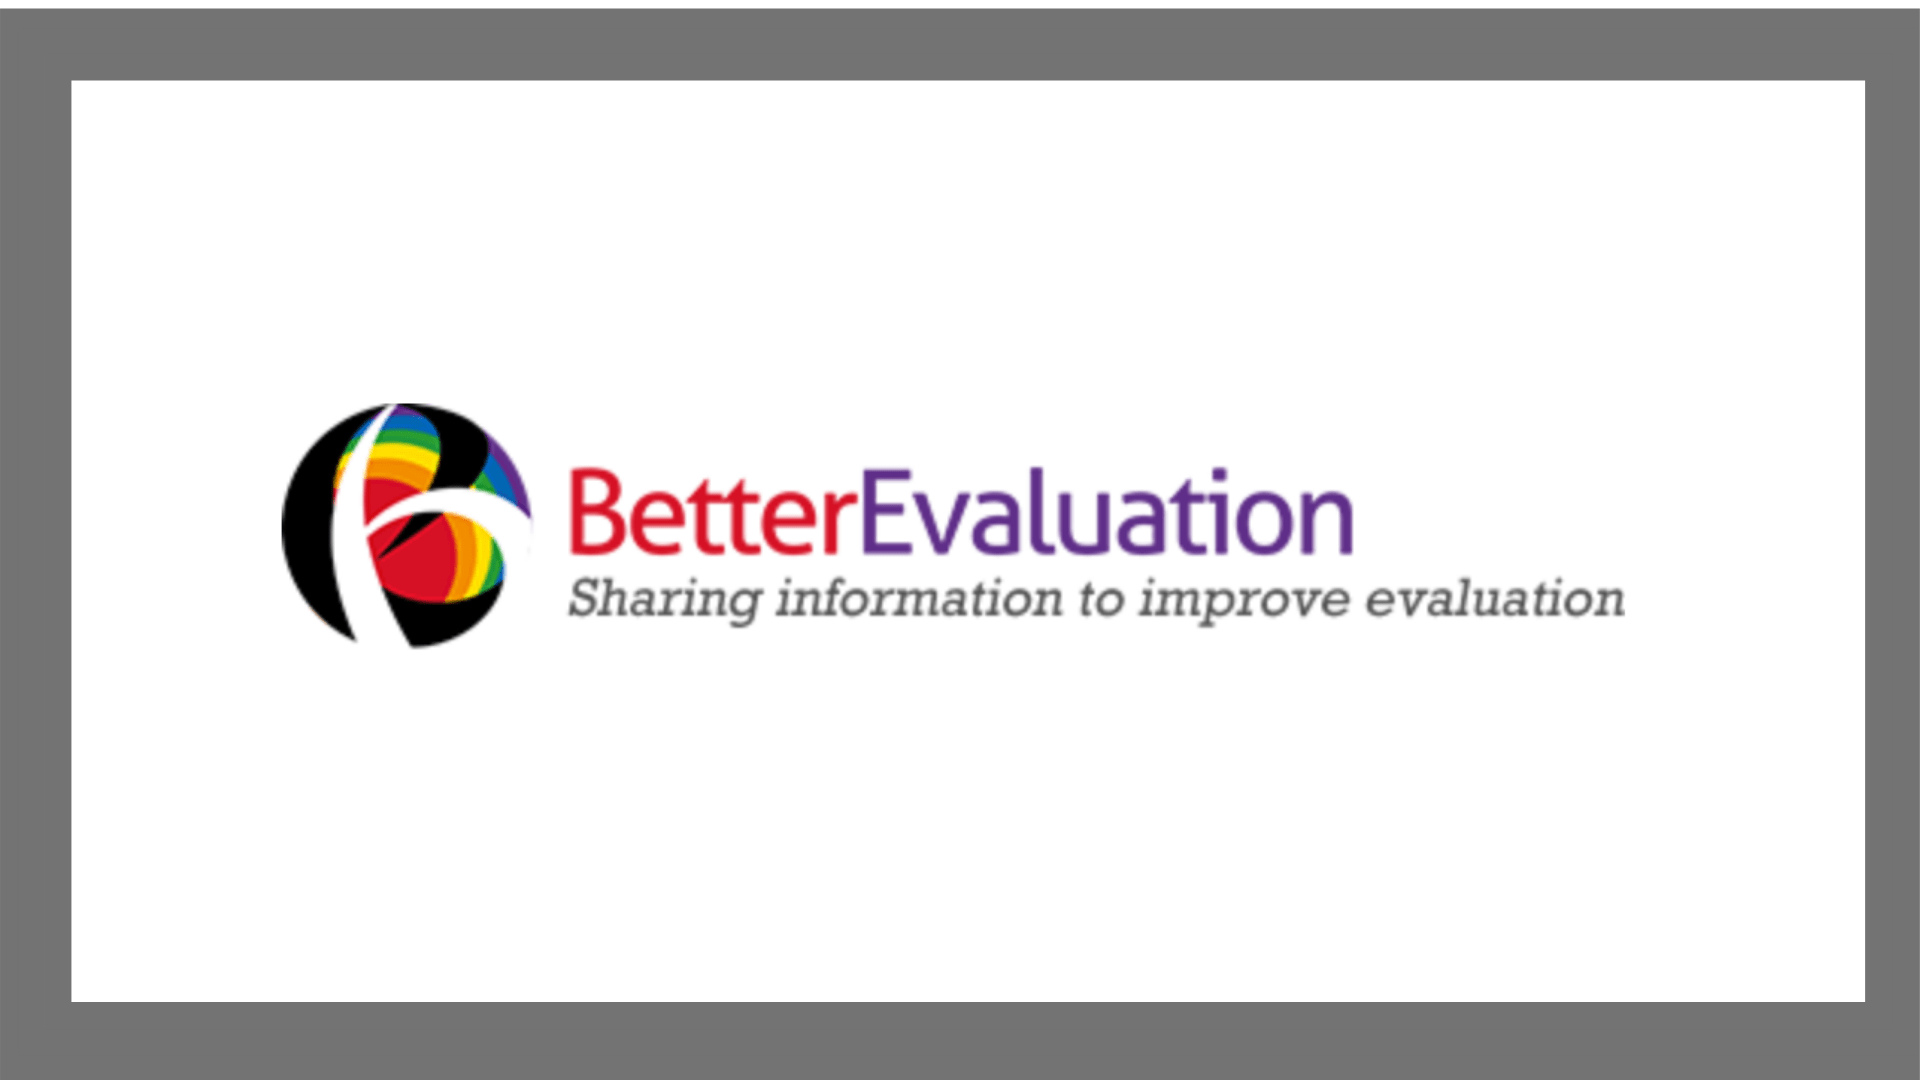 Choosing the most appropriate evaluation methods, processes and approaches